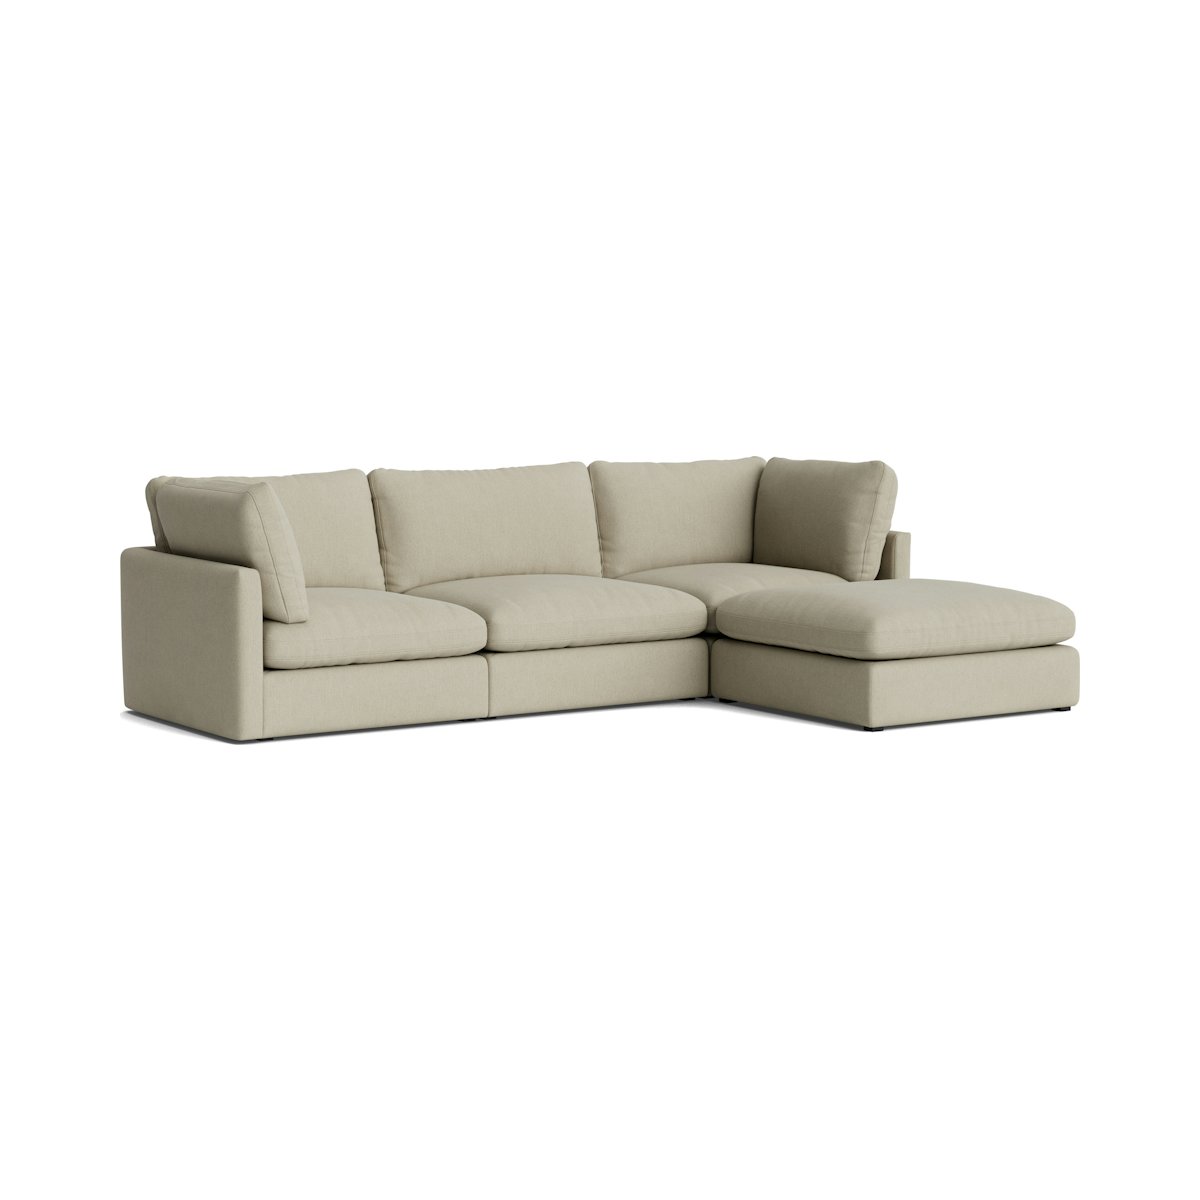 Hackney Lounge Compact Sectional